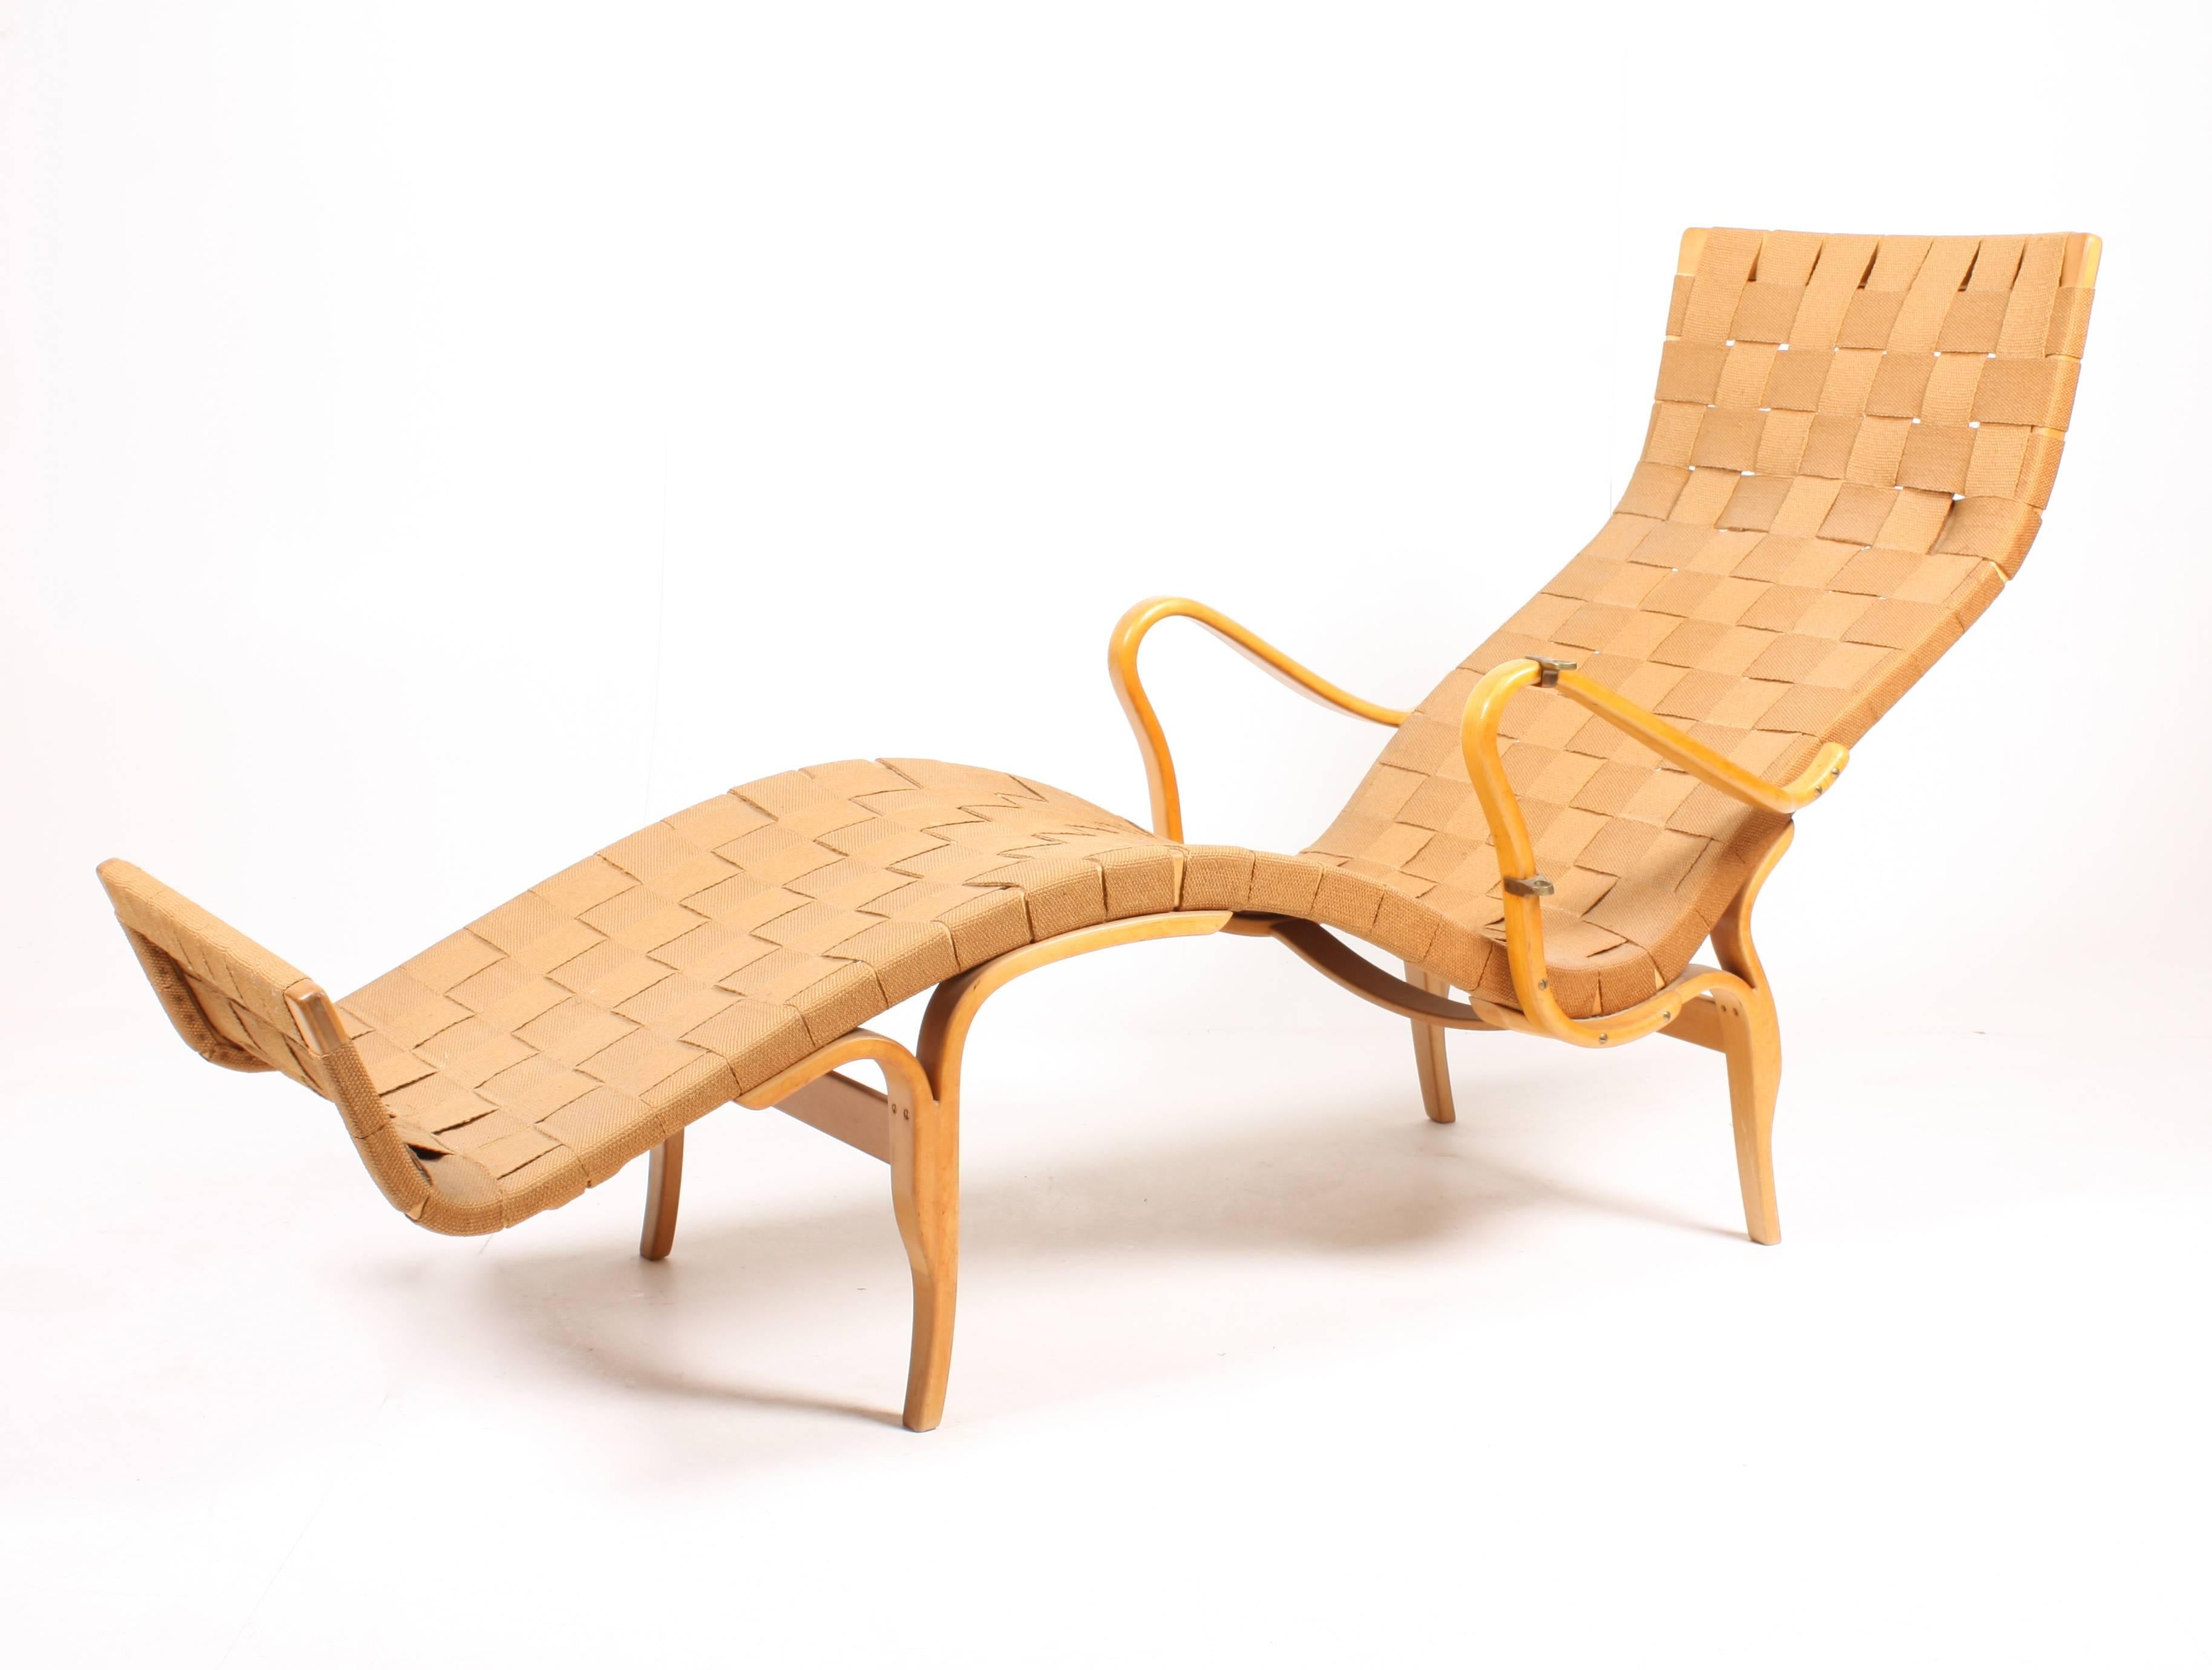 Bruno Mathsson lounge chair with adjustable writing table and original hemp webbing. Seatframe, arms and underframe of laminated beech. Produced by Firma Karl Mathsson

Bruno Mathsson was born to cabinet making. His father, Karl Mathsson was the